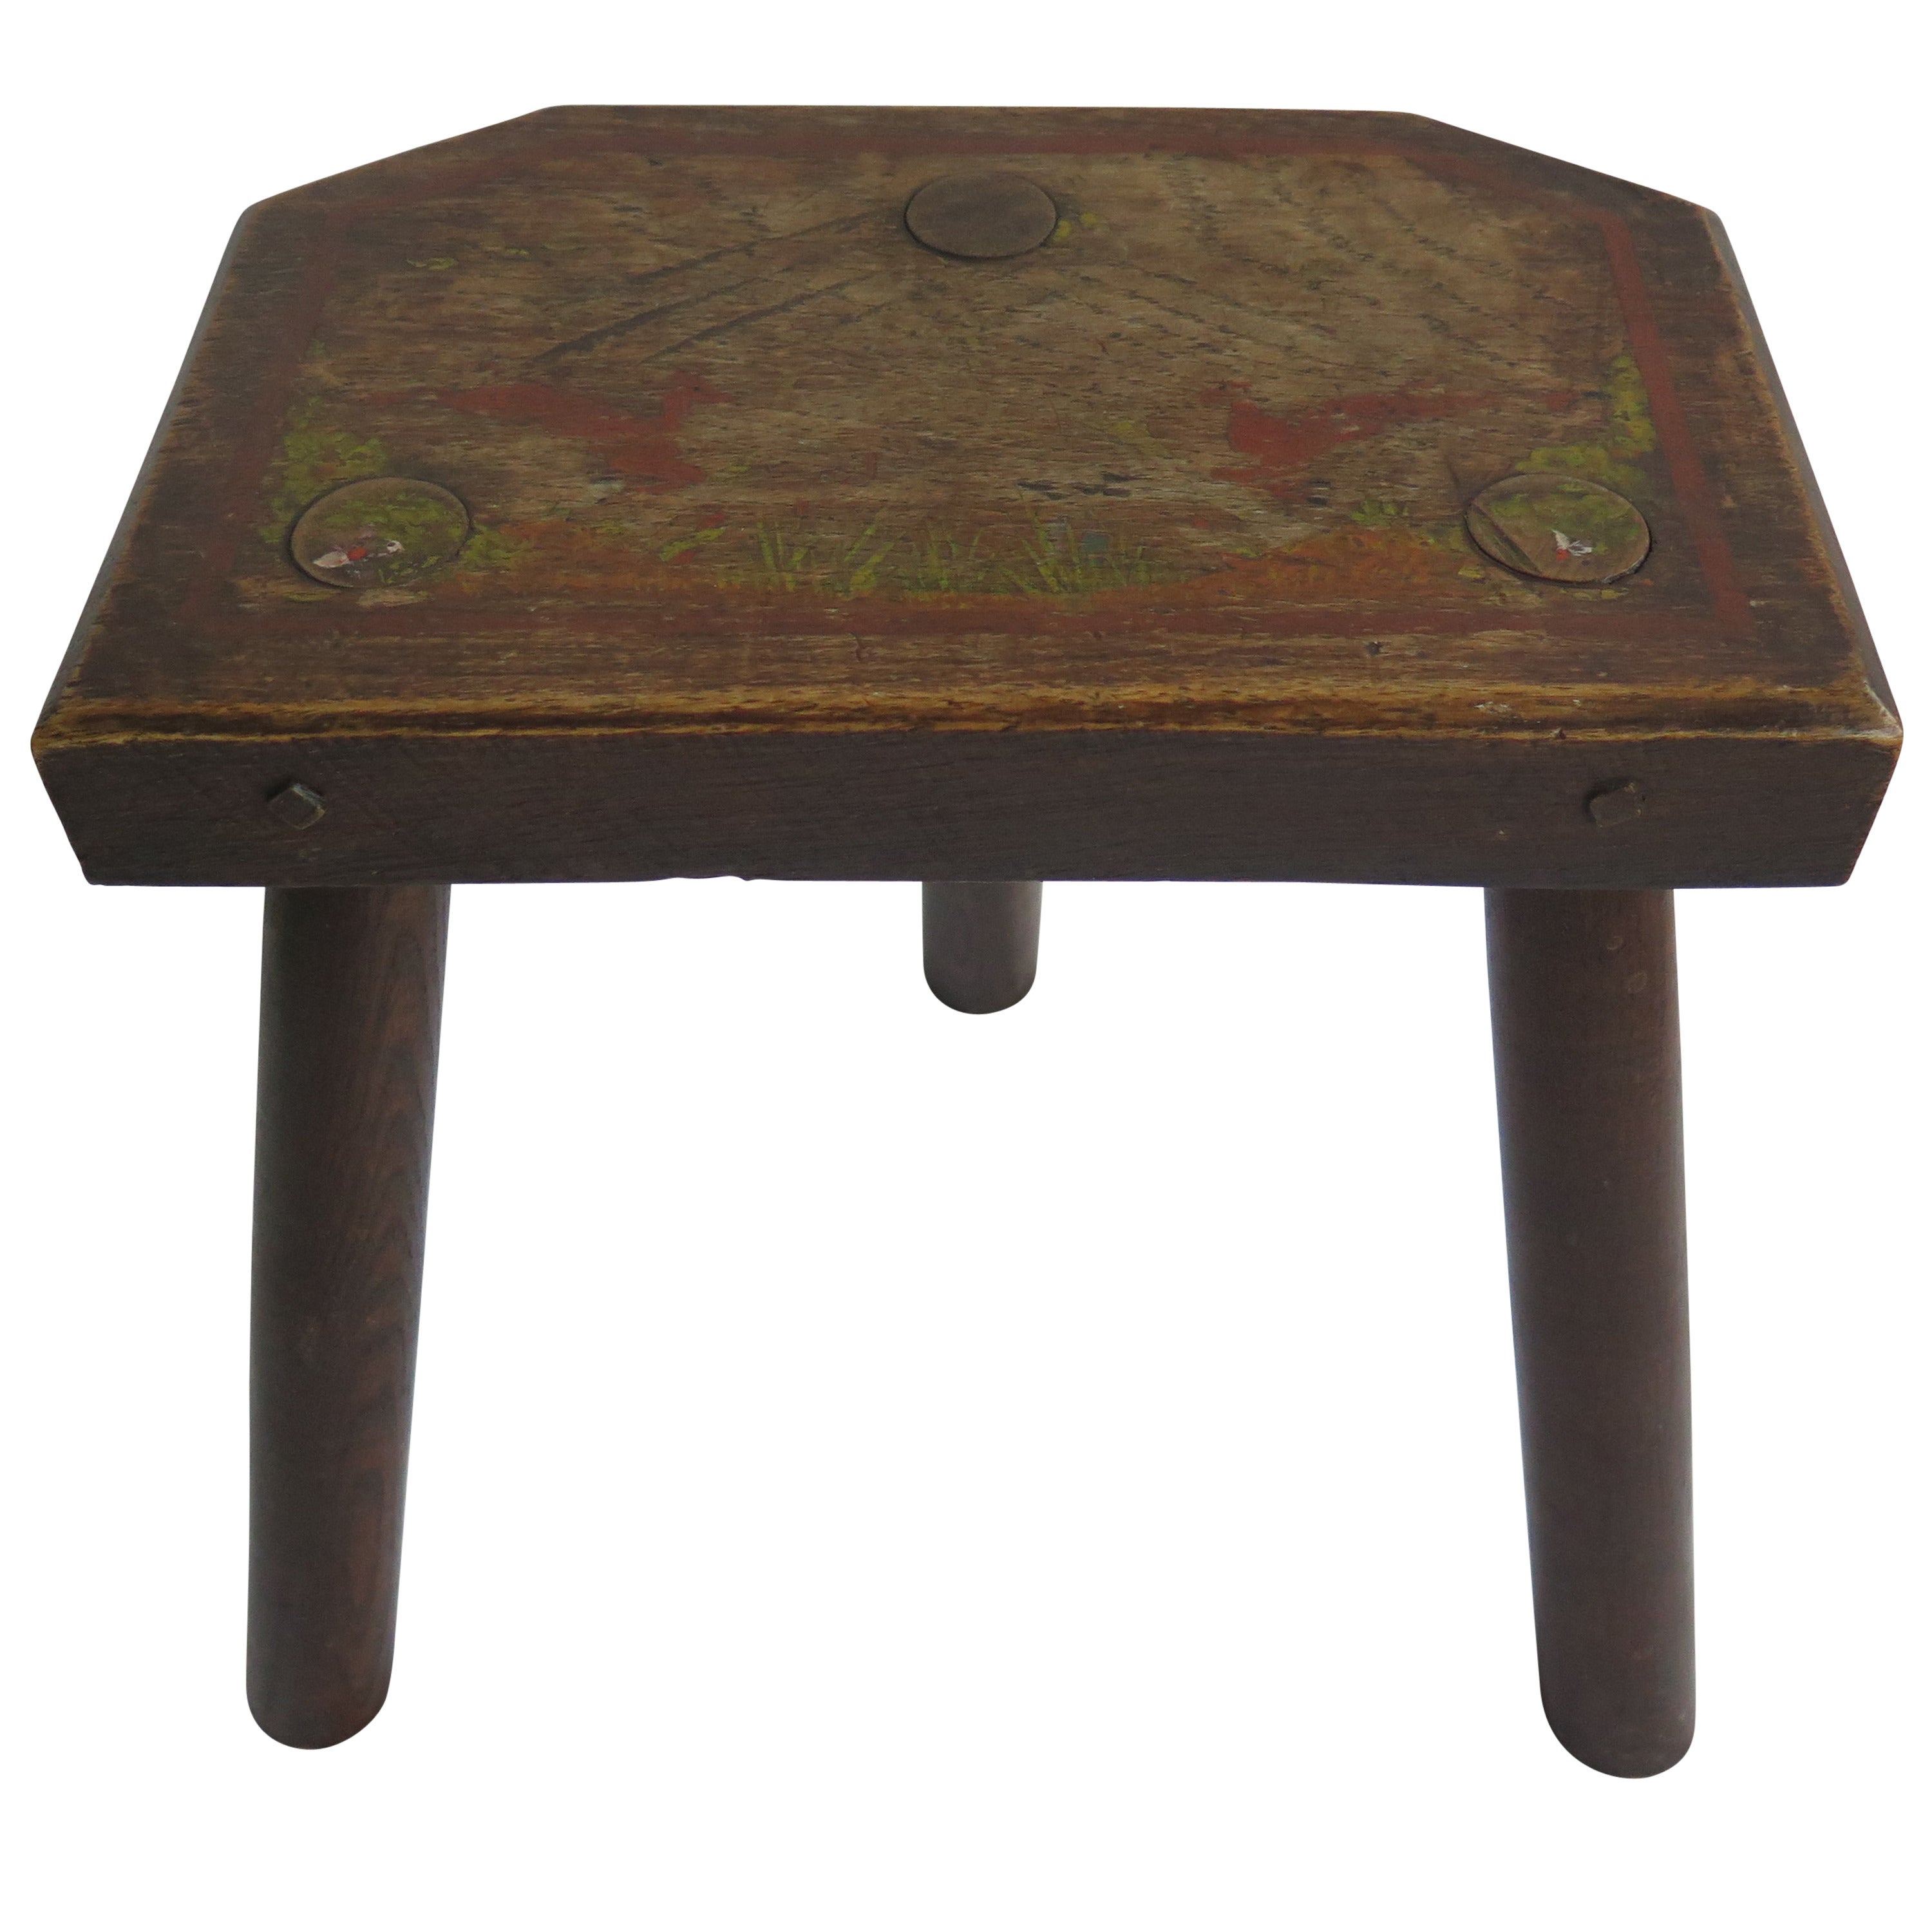 This is a 19th century, English milking stool, with a chamfered rectangular Elm top having a hand painted, Folk Art, country scene on it. It has three turned oak legs that are pegged into the top. 

Original hand painted furniture is rare.

We